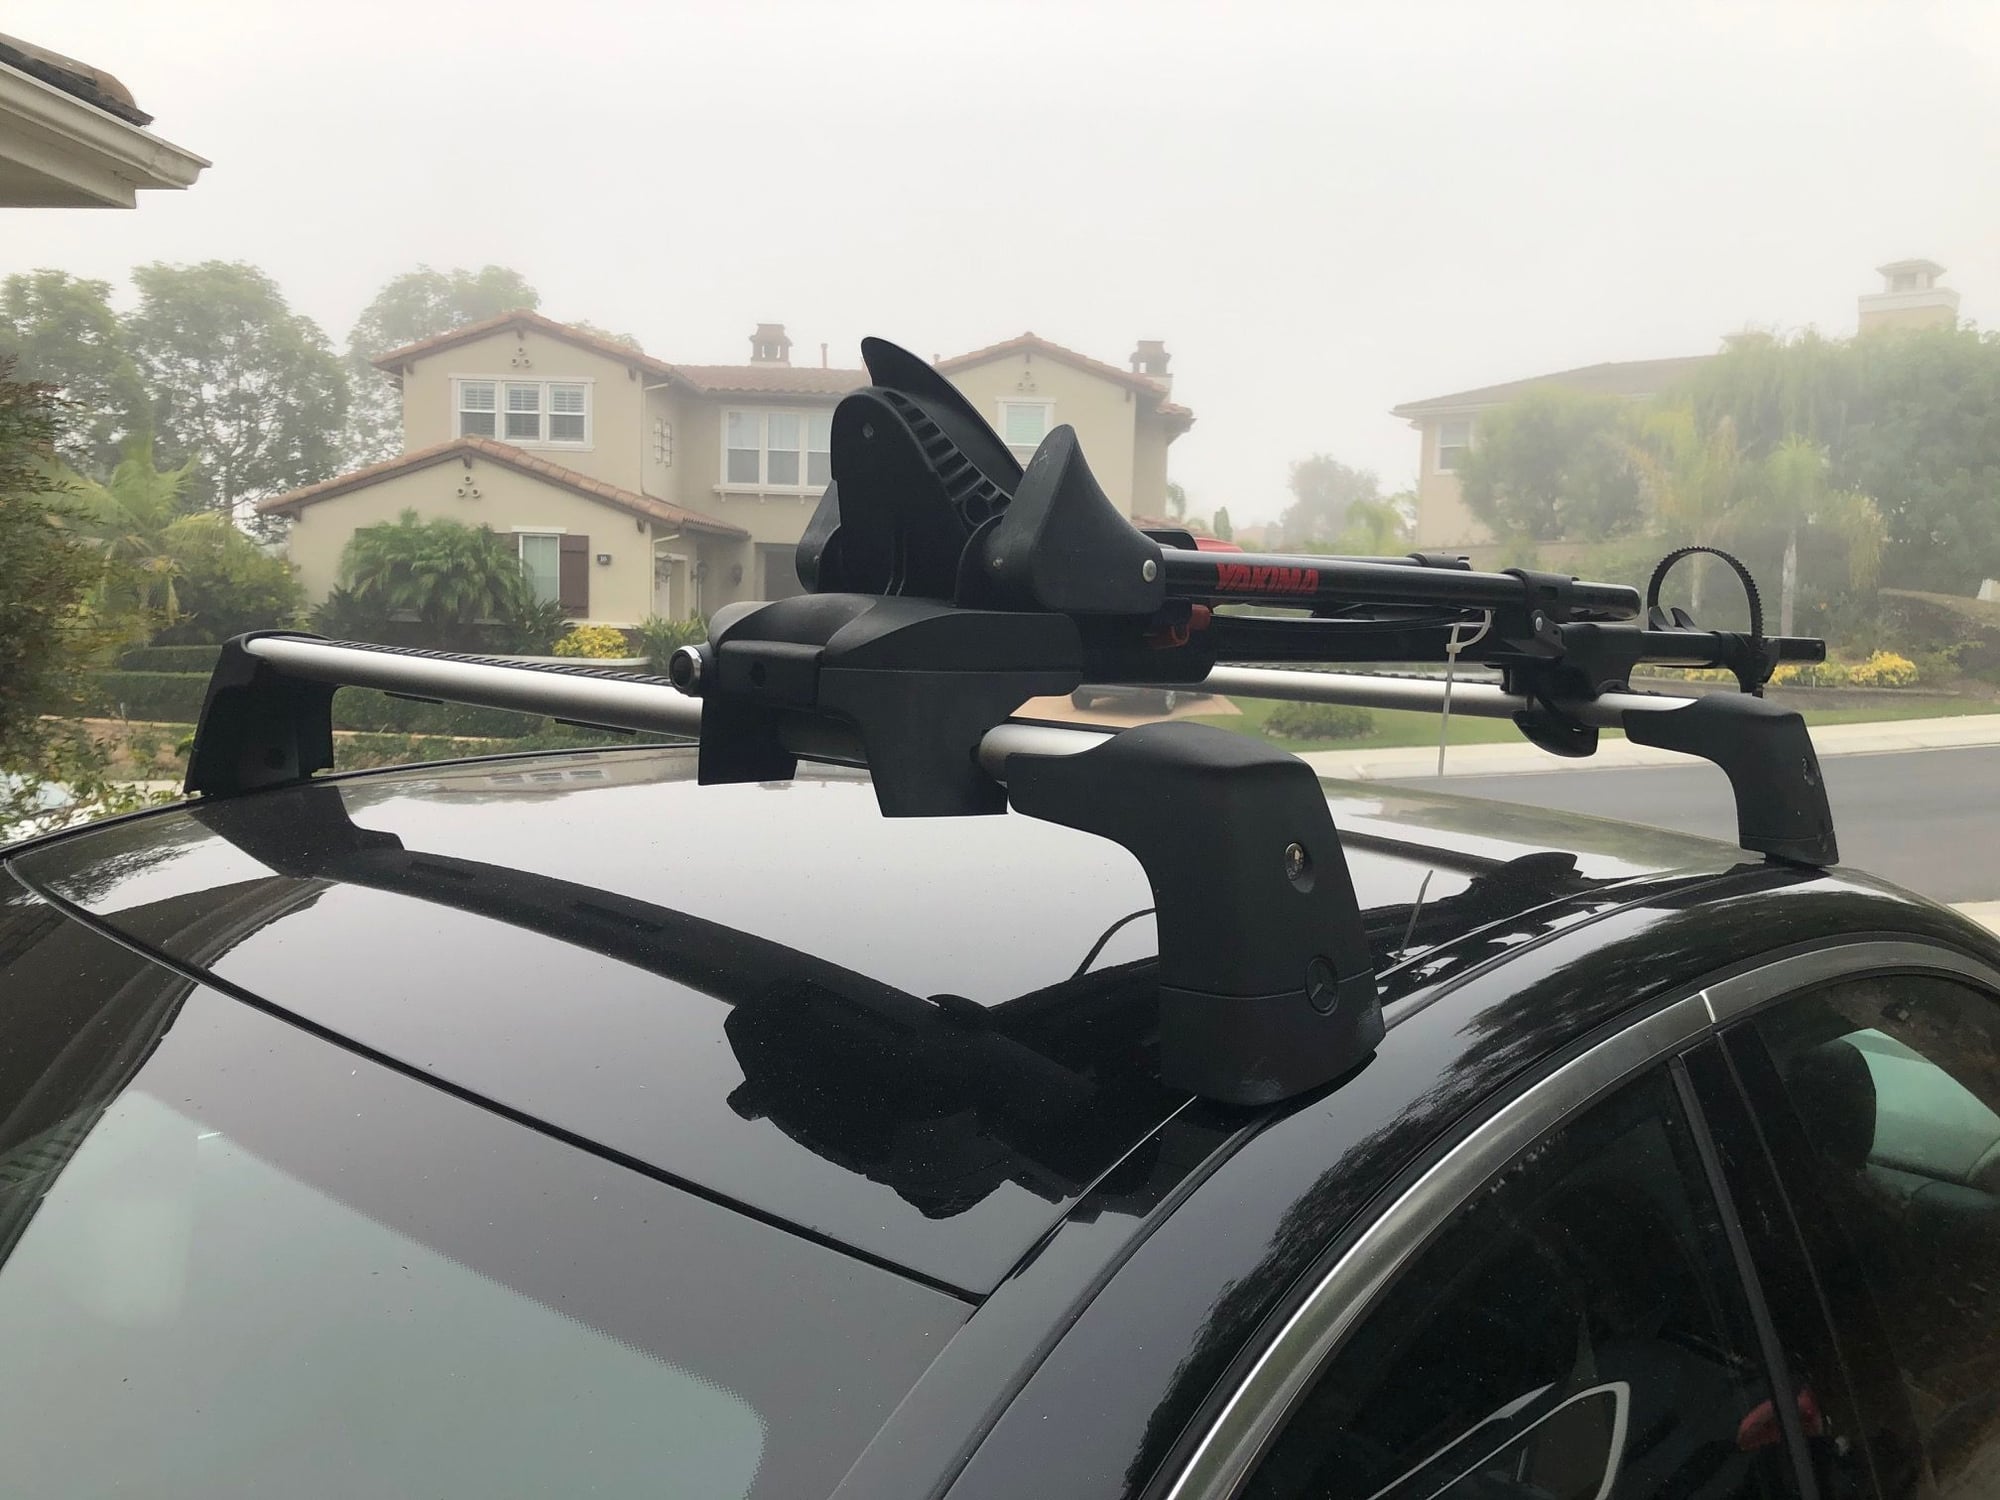 Accessories - Mercedes C-Class (C300/350e) OEM Roof Rack - Used - 2015 to 2020 Mercedes-Benz All Models - Dana Point, CA 92629, United States